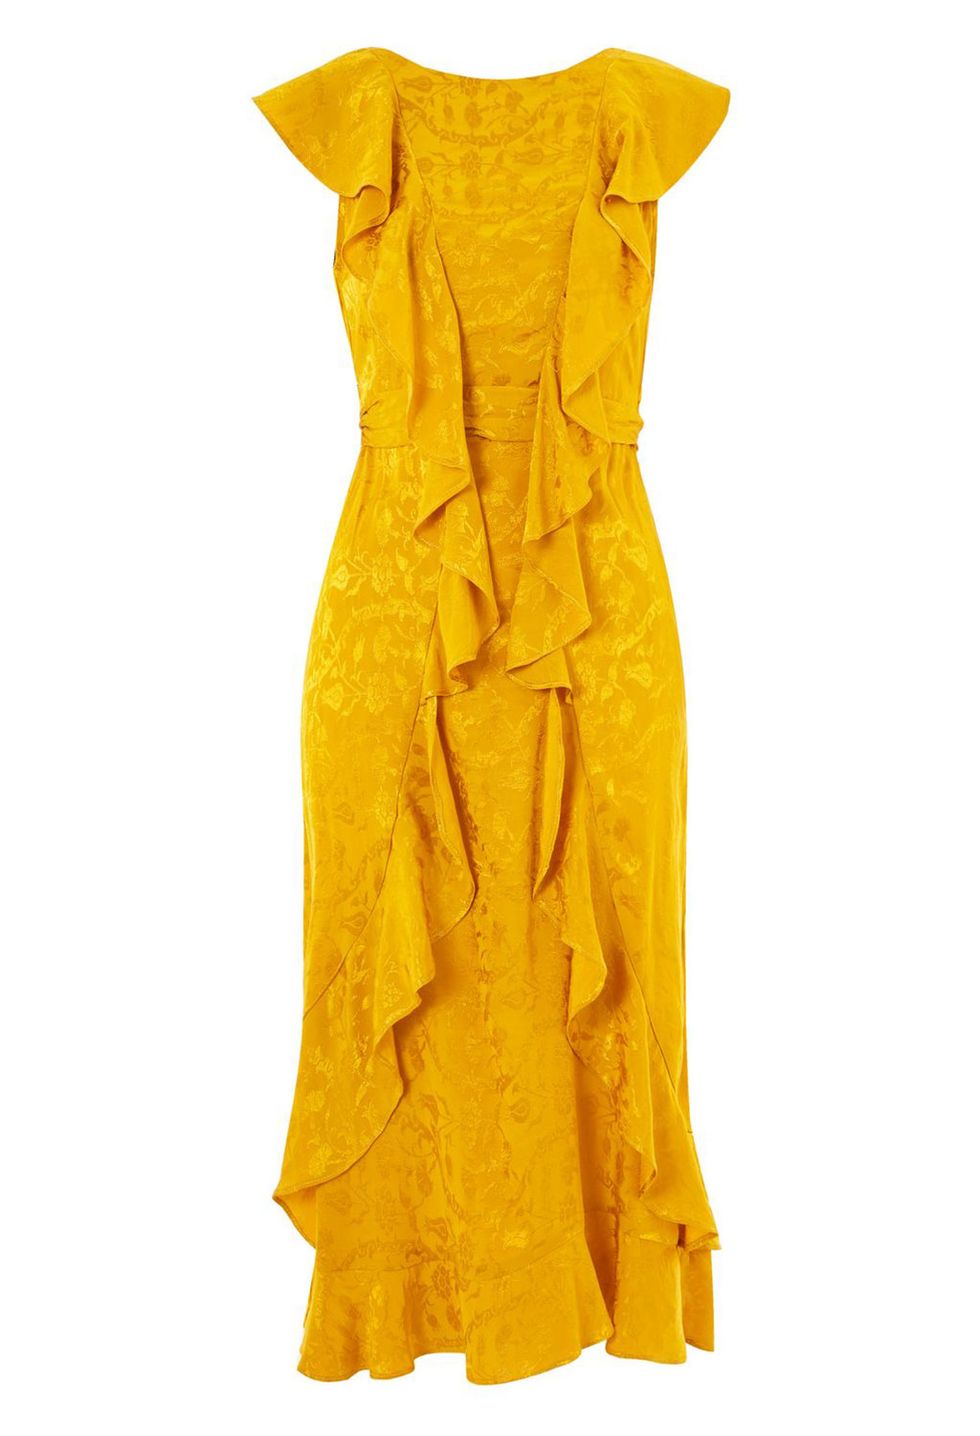 Clothing, Day dress, Yellow, Dress, One-piece garment, Cocktail dress, Ruffle, Sleeve, Cover-up, 